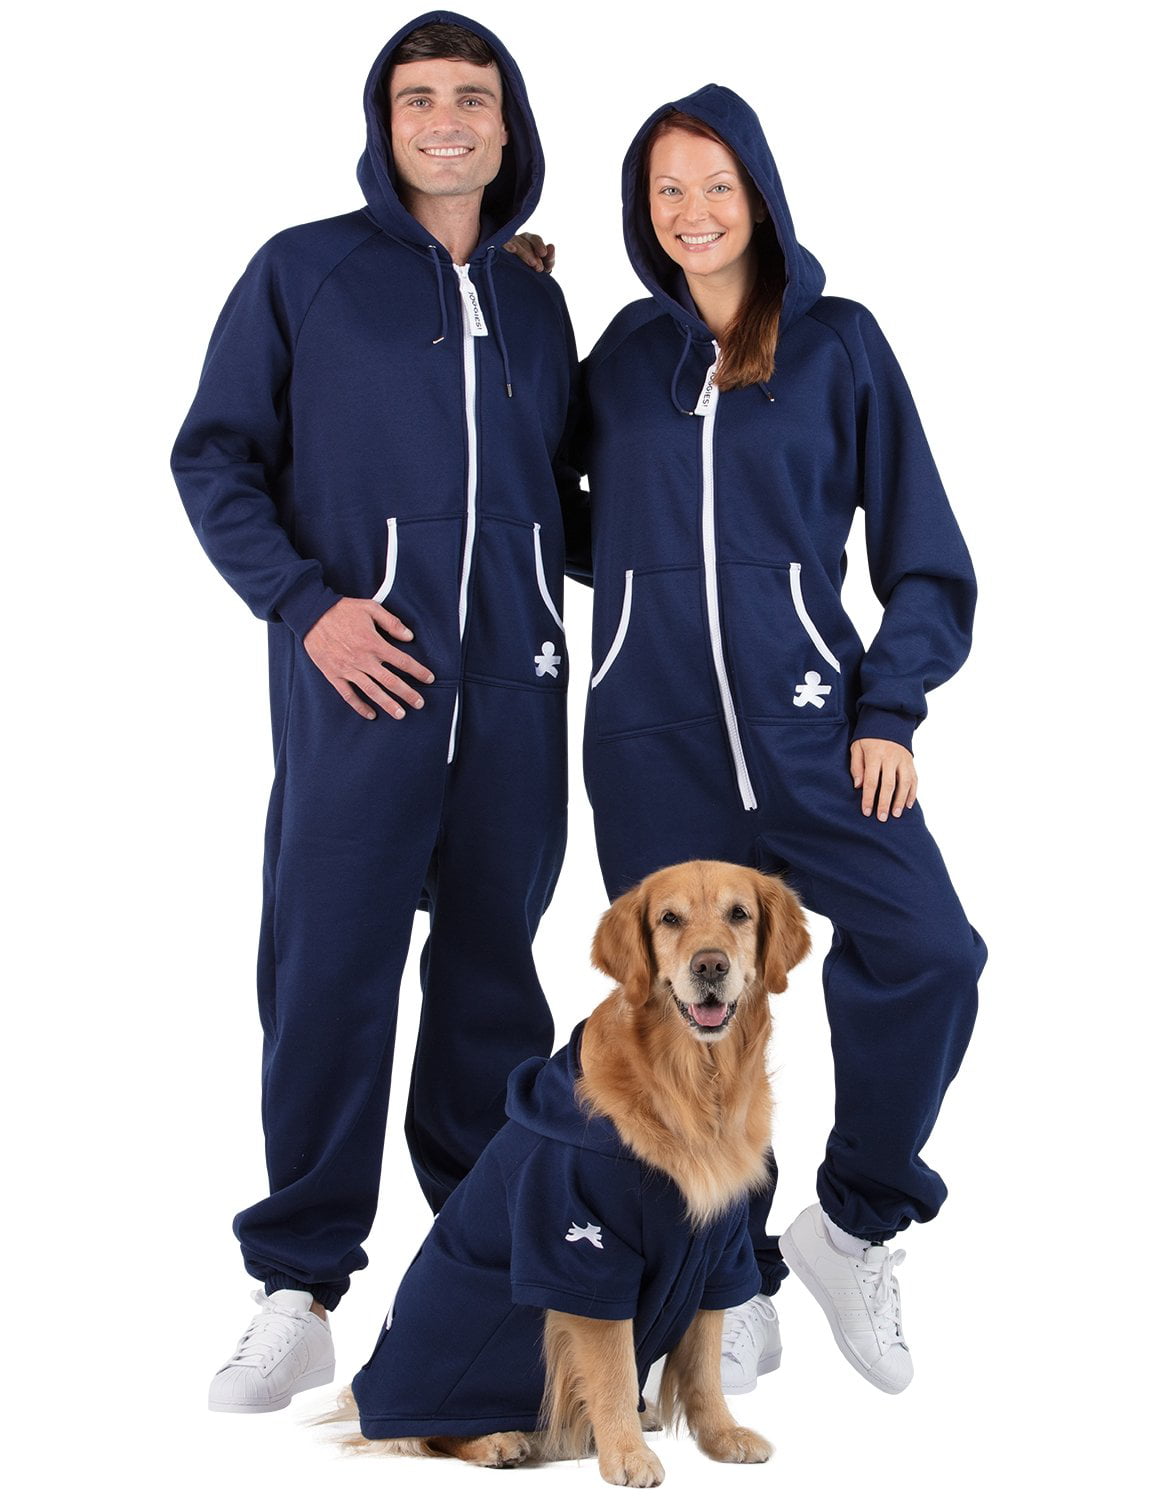 R.I.P. Snuggie! Say hello to the Hoodie Footie Snuggle Suit